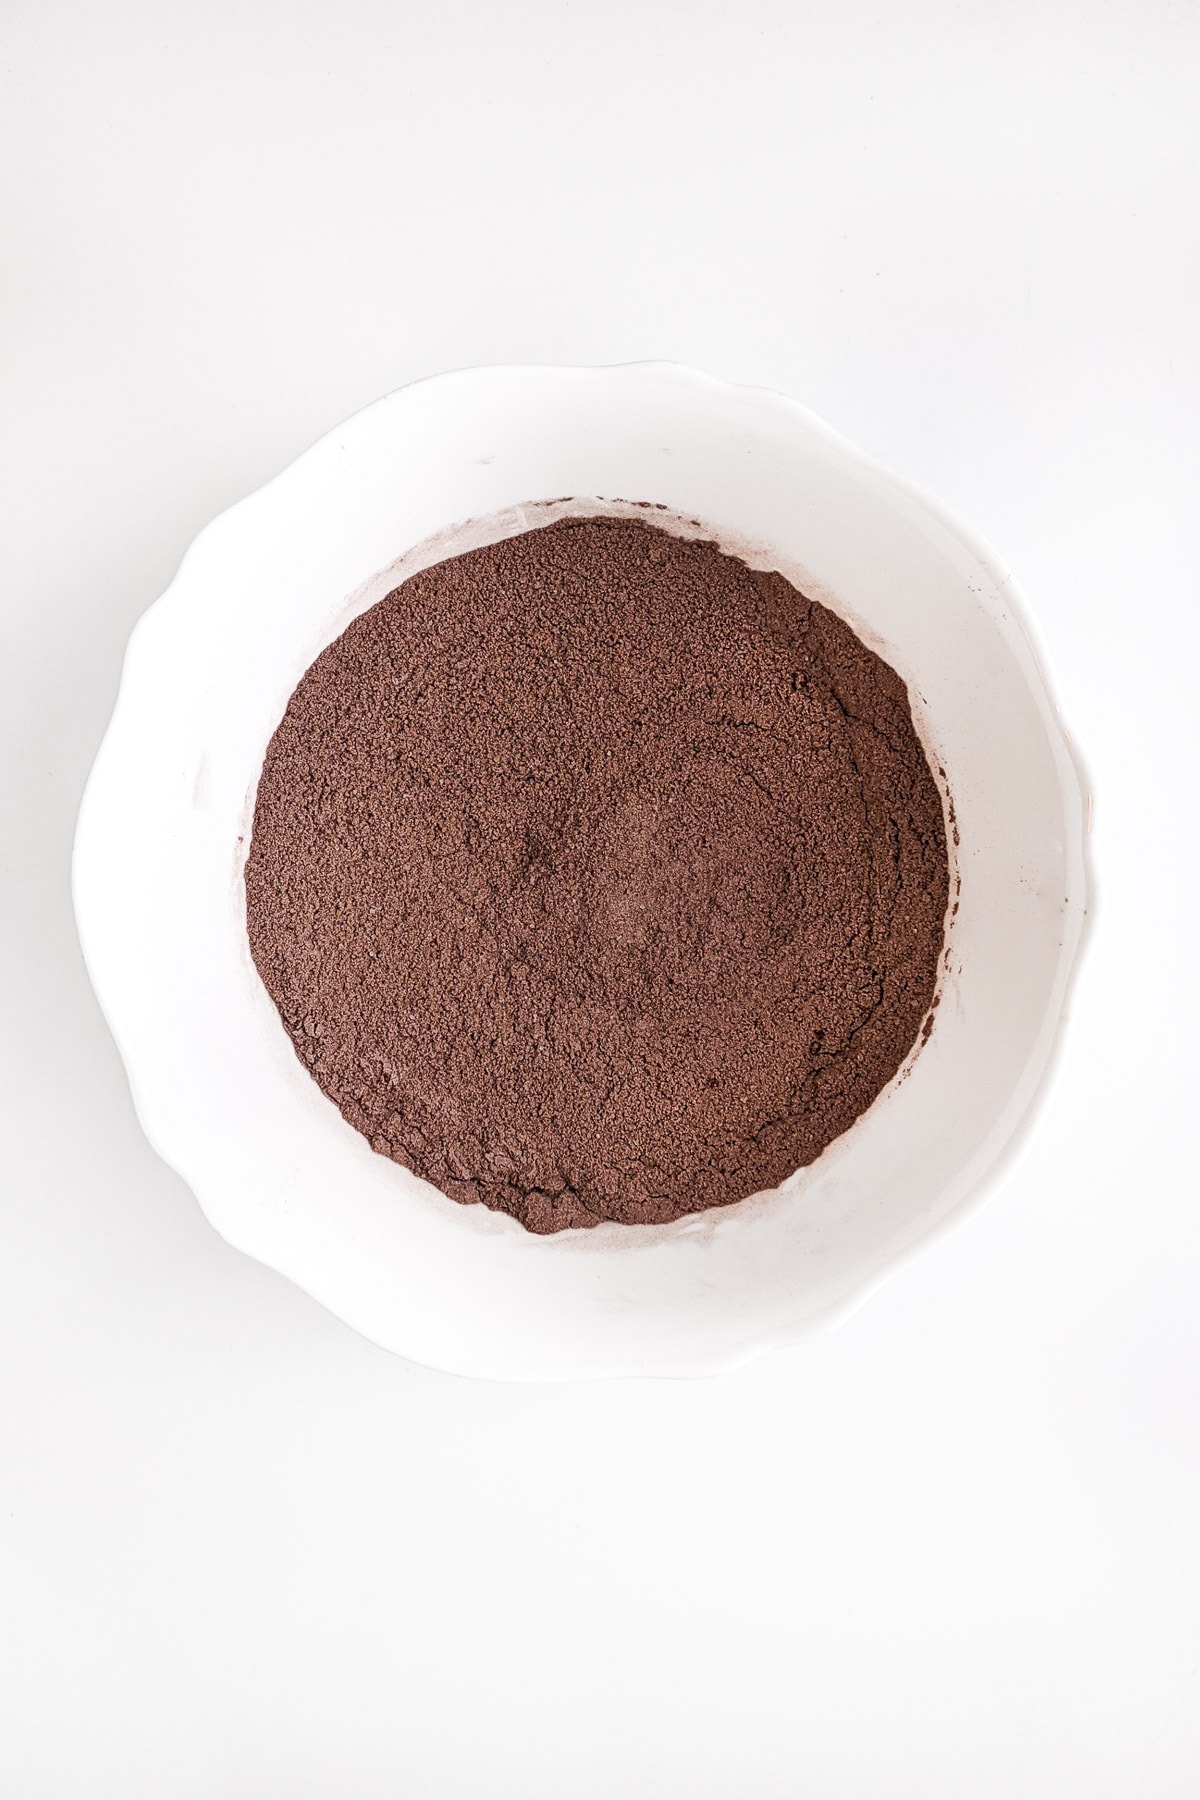 White bowl with a mix of cacao, sugar and all purpose flour.